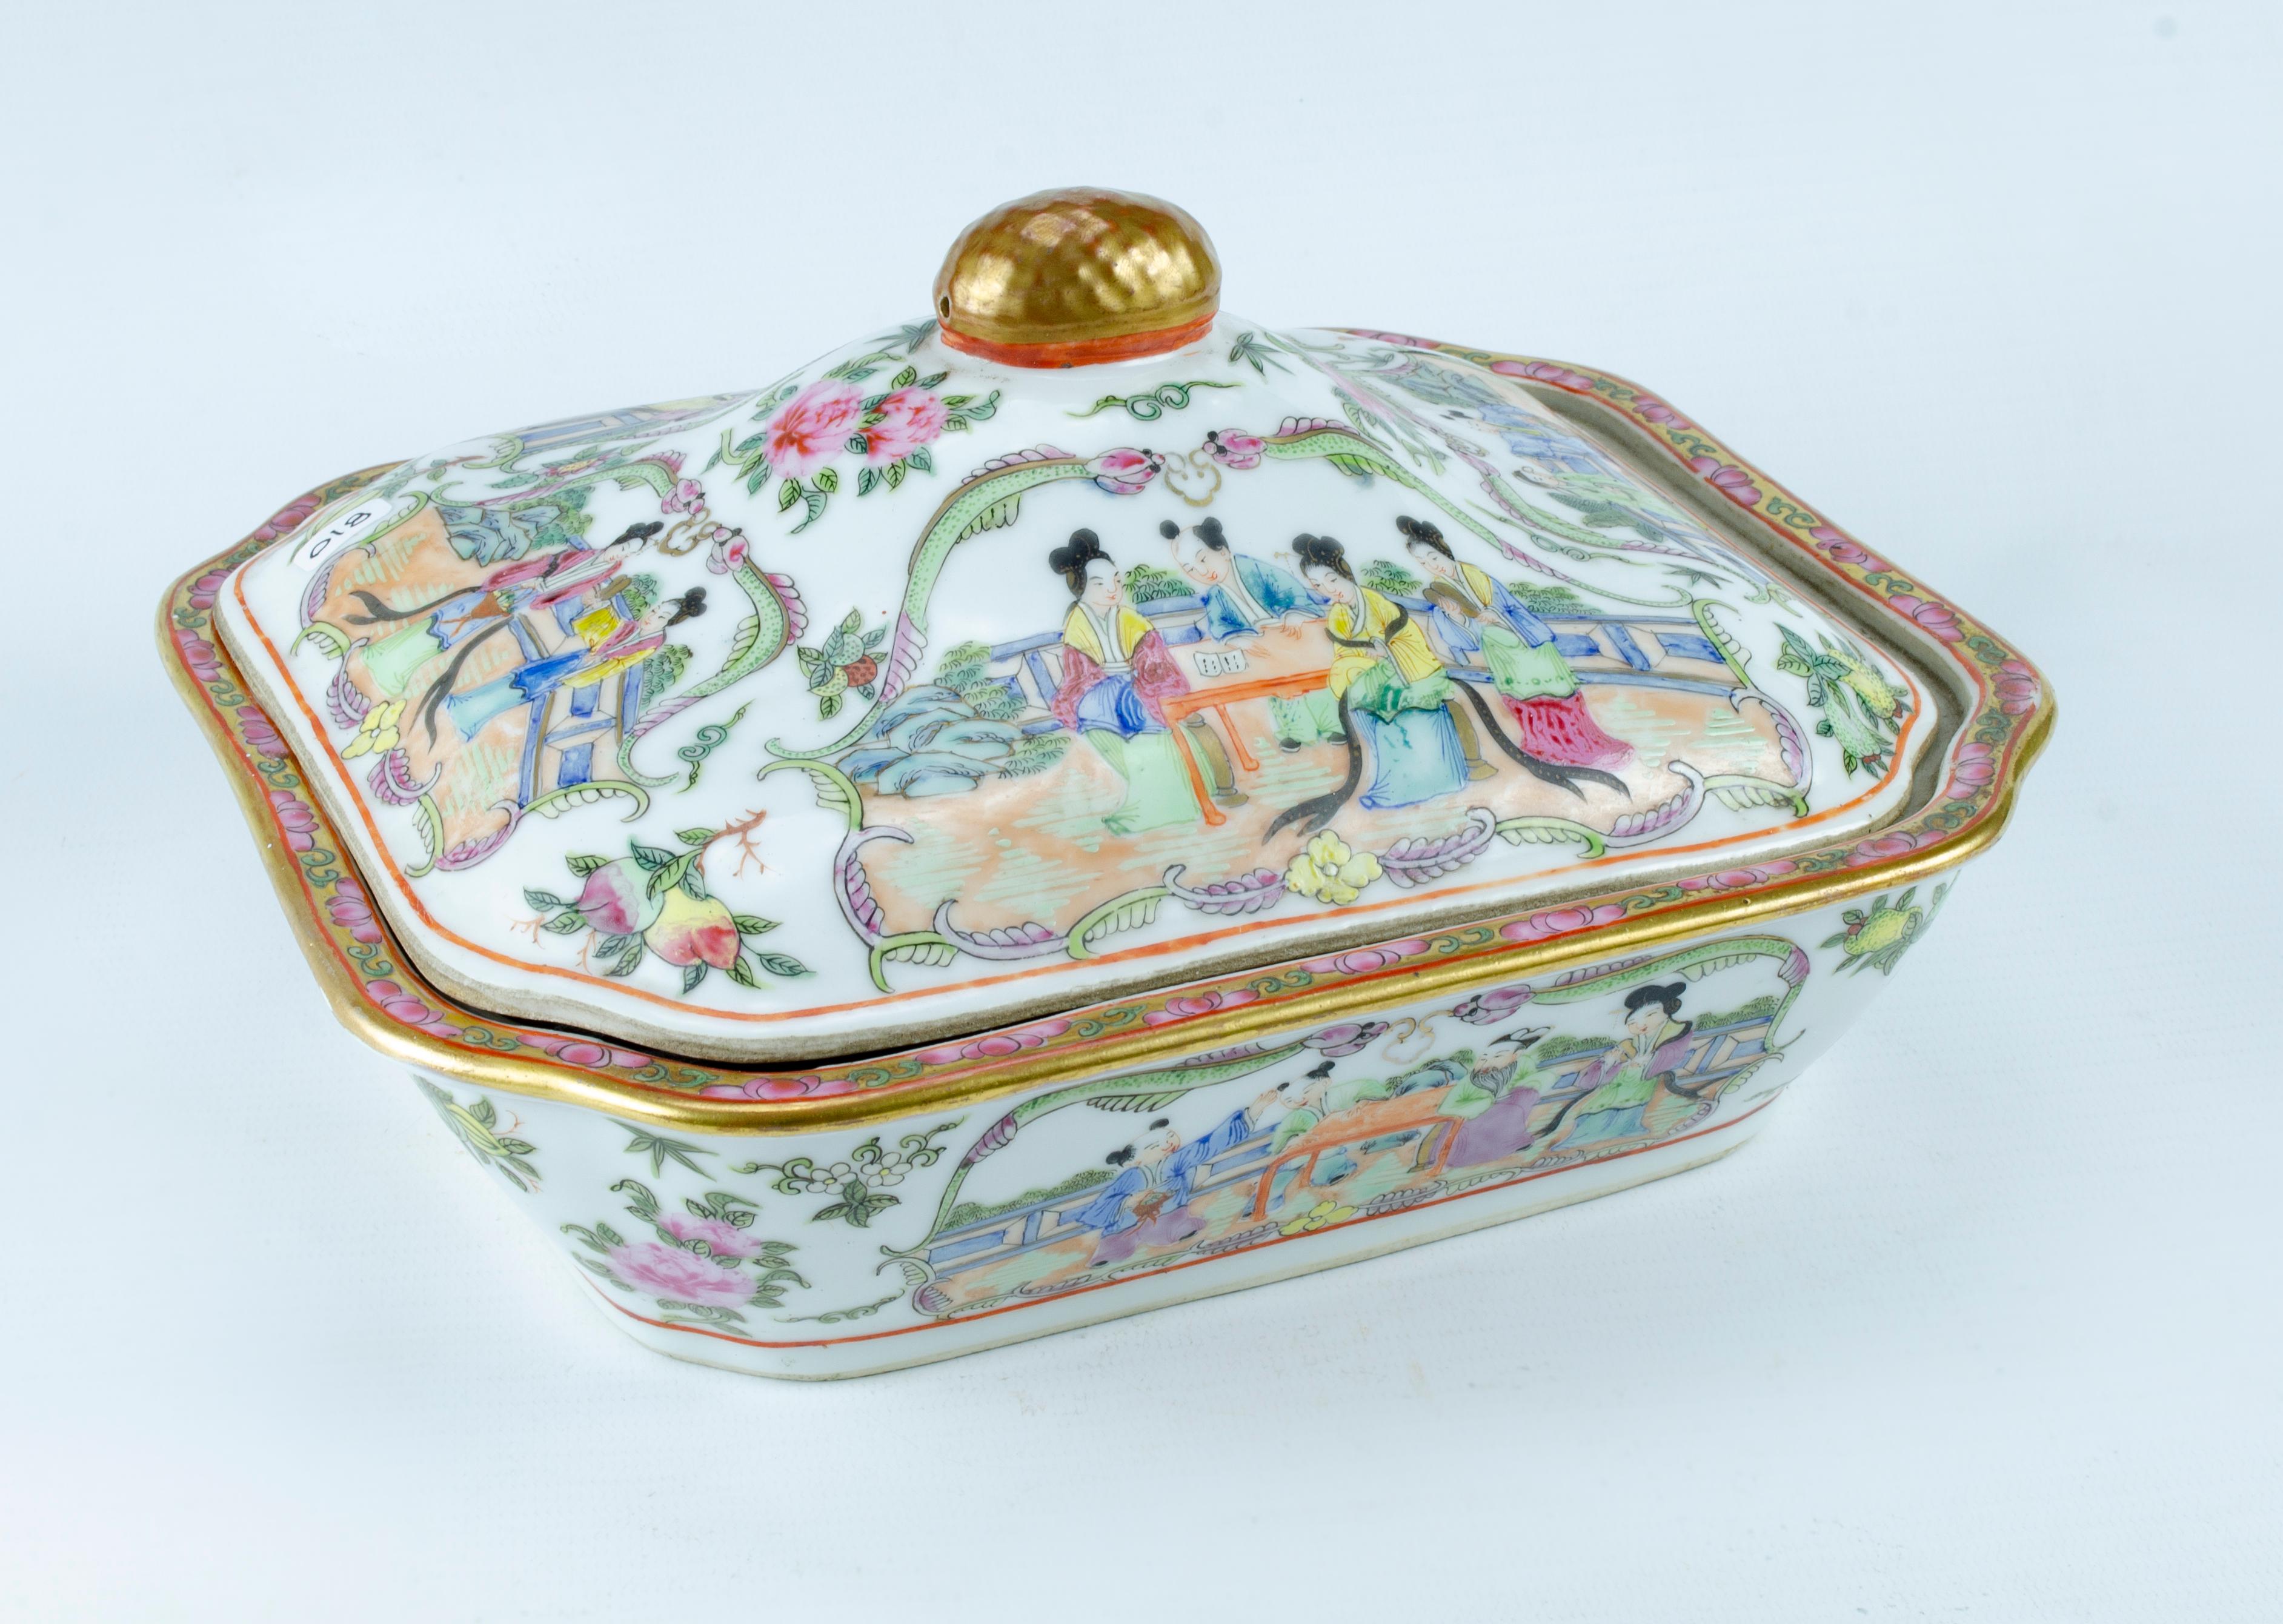 China canton porcelain.
Export Circa 1920.
Family Rose style.
box with lid.
Polychromy with natural wear.
Decorated with traditional scenes.